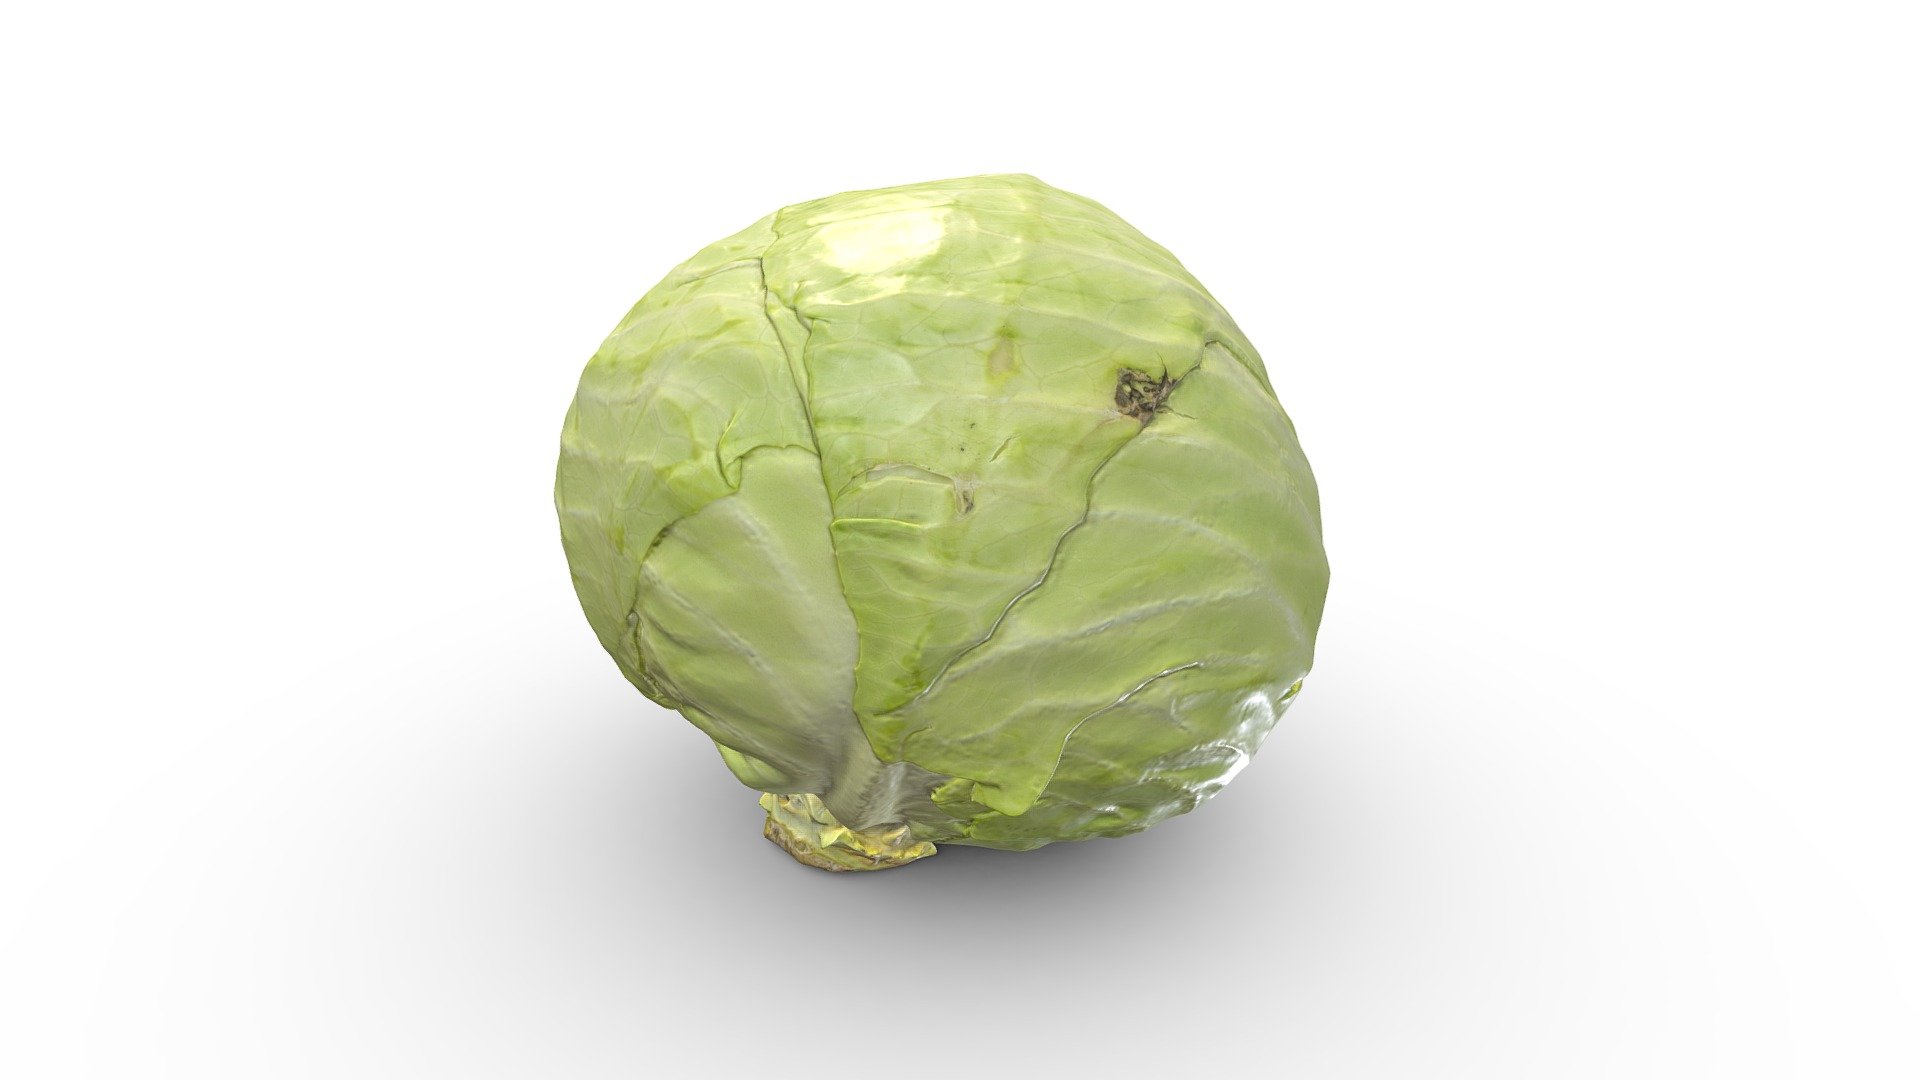 High-poly white cabbage photogrammetry scan. PBR texture maps 4096x4096 px. resolution for metallic or specular workflow. Scan from real food, high-poly 3D model, 4K resolution textures.

Additional file contains low-poly 3d model version, game-ready in real time 3d model